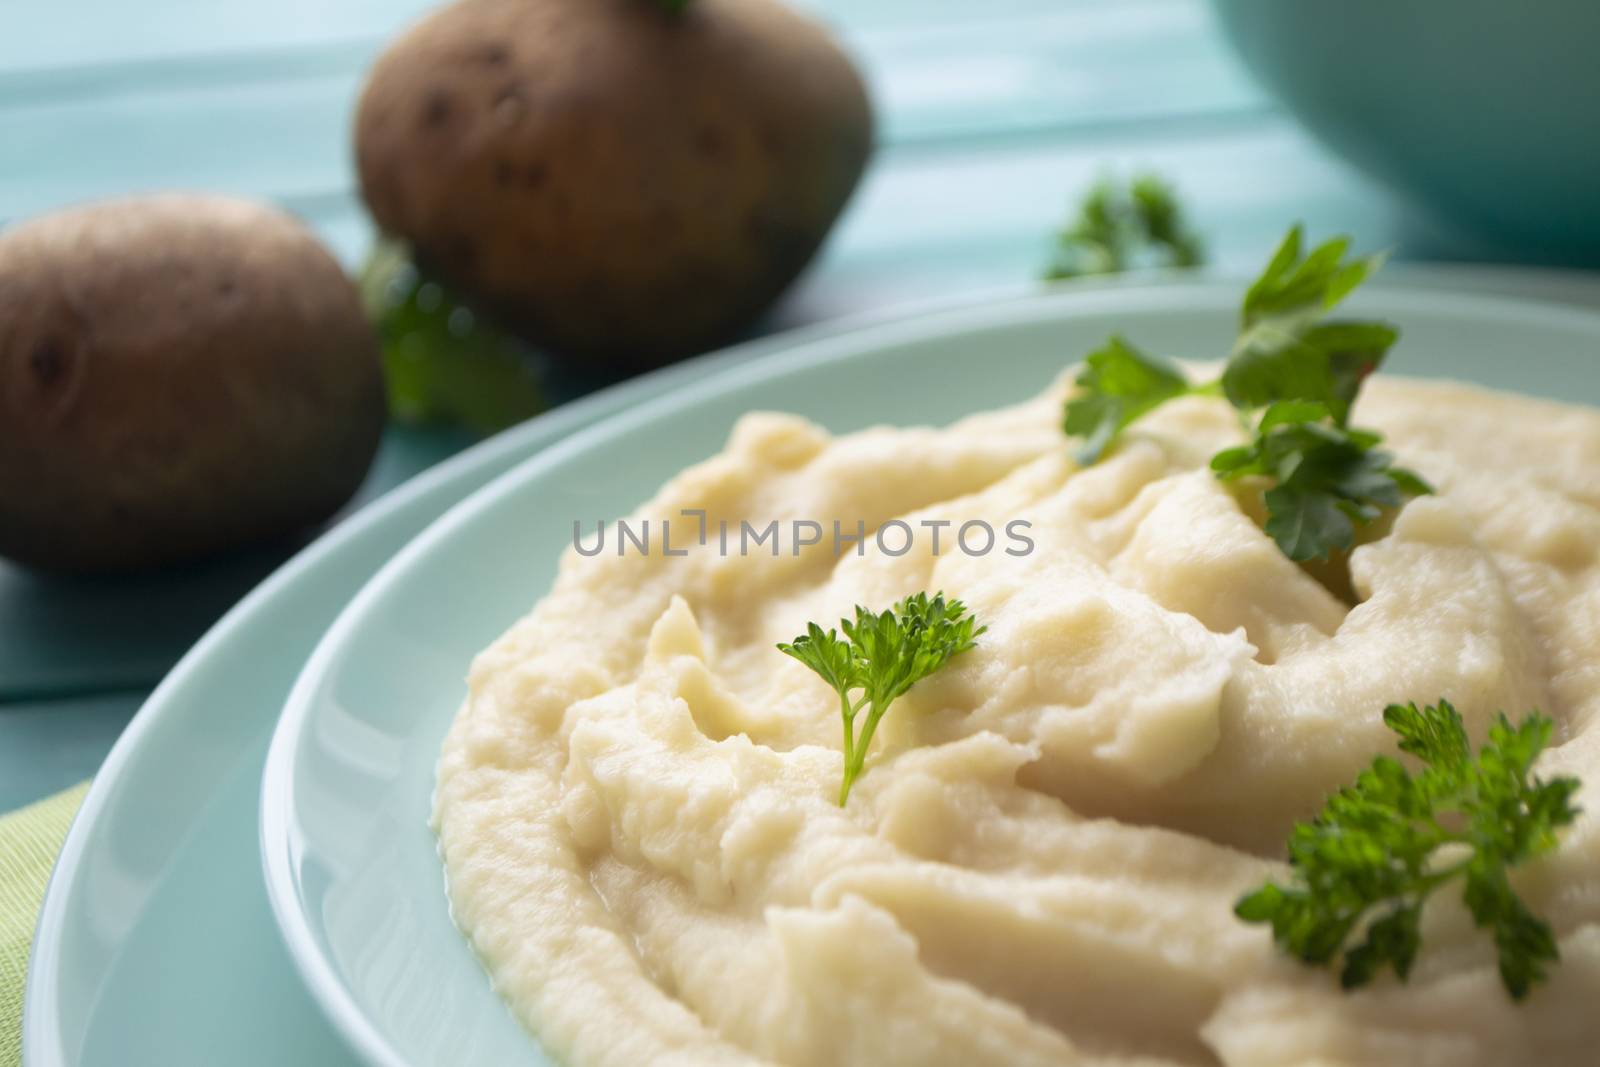 Rustic mashed potatoes with greens in bowl closeup